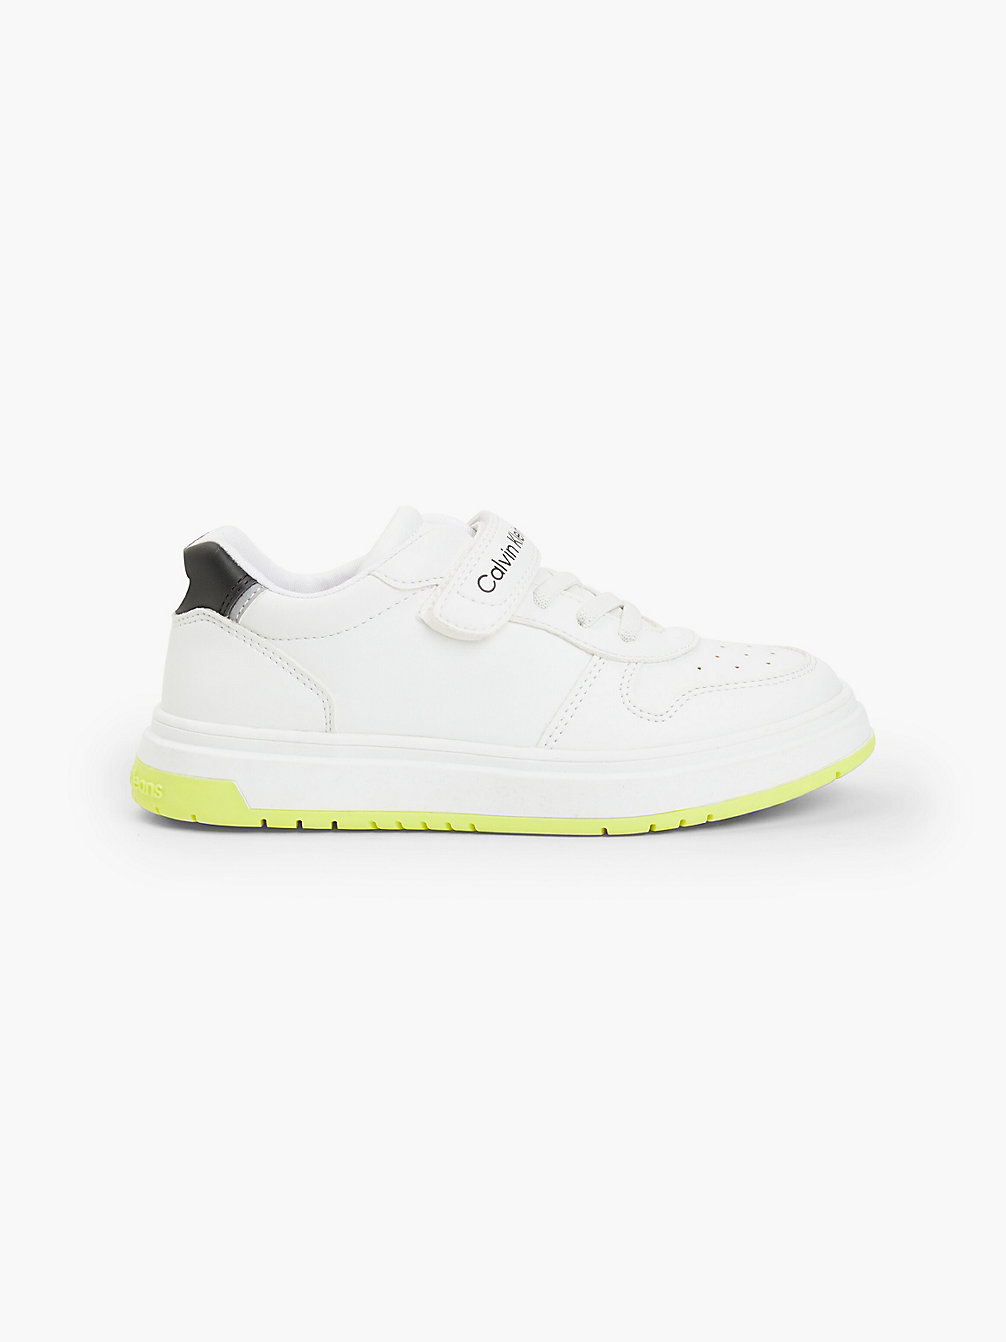 WHITE / BLACK Recycled Trainers undefined kids unisex Calvin Klein